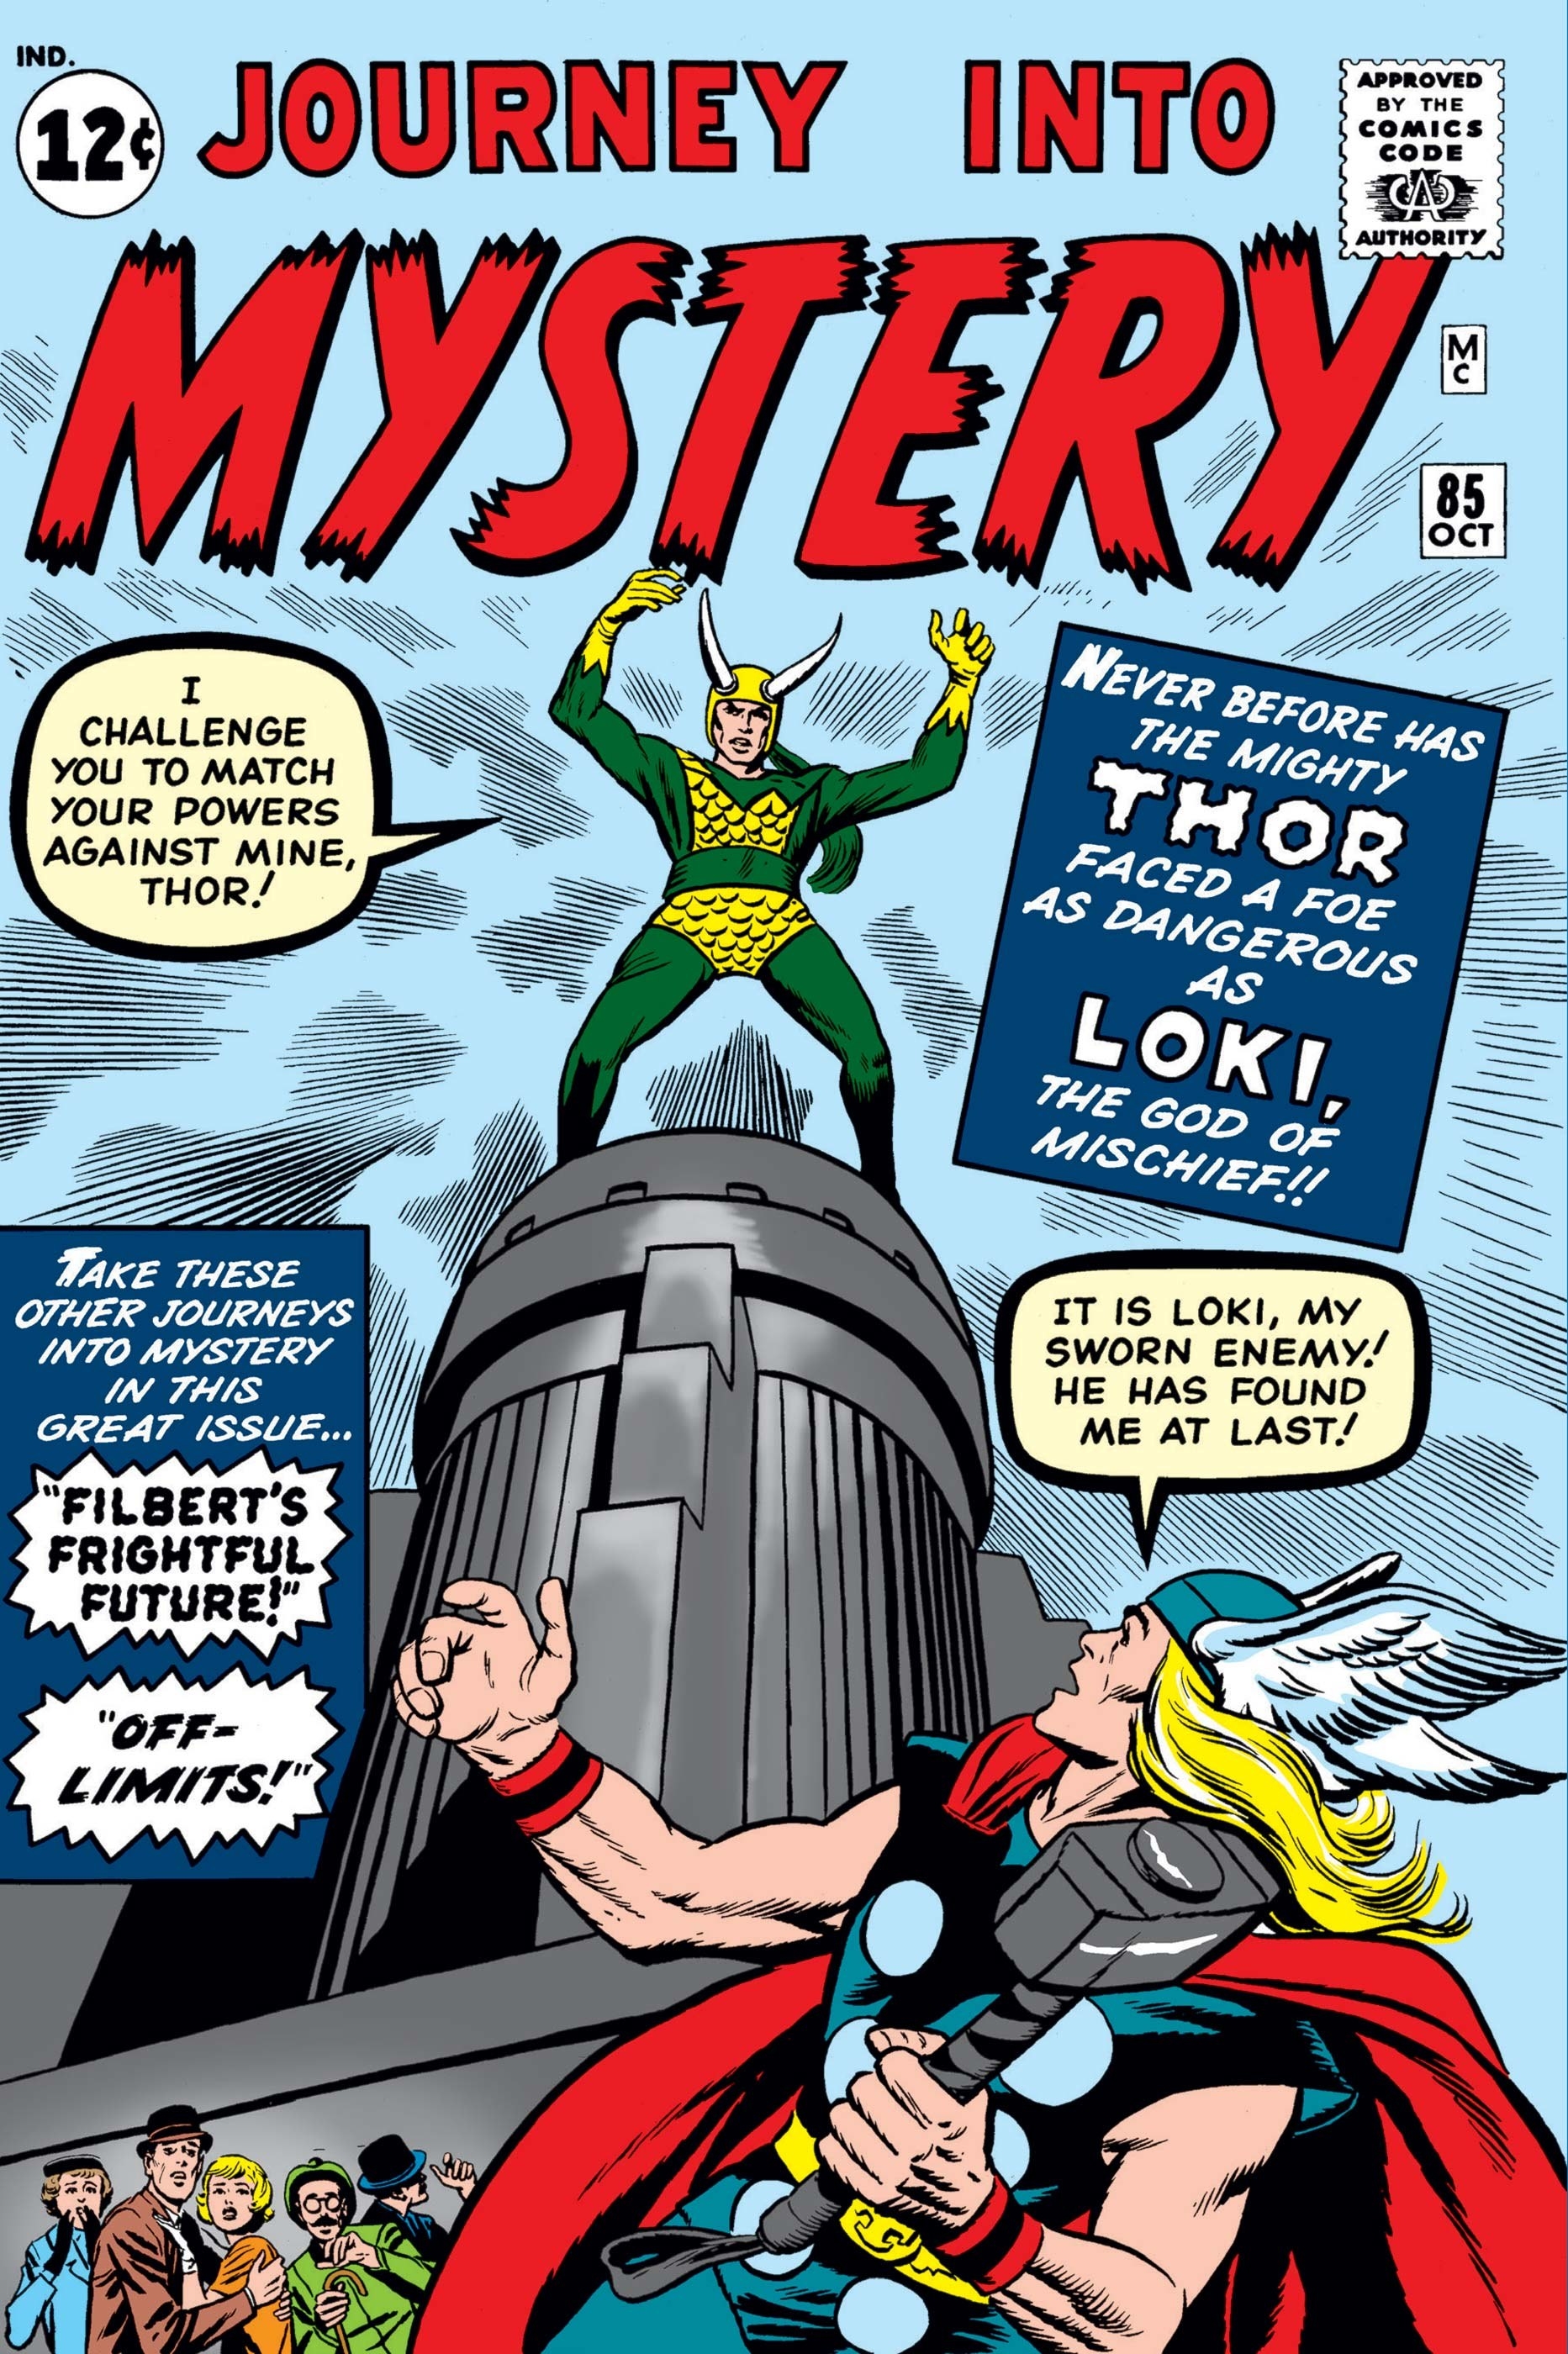 Cover of the Marvel comic Journey into Mystery, where Loki stands on a building with a horned helmet and a suit with scales on it